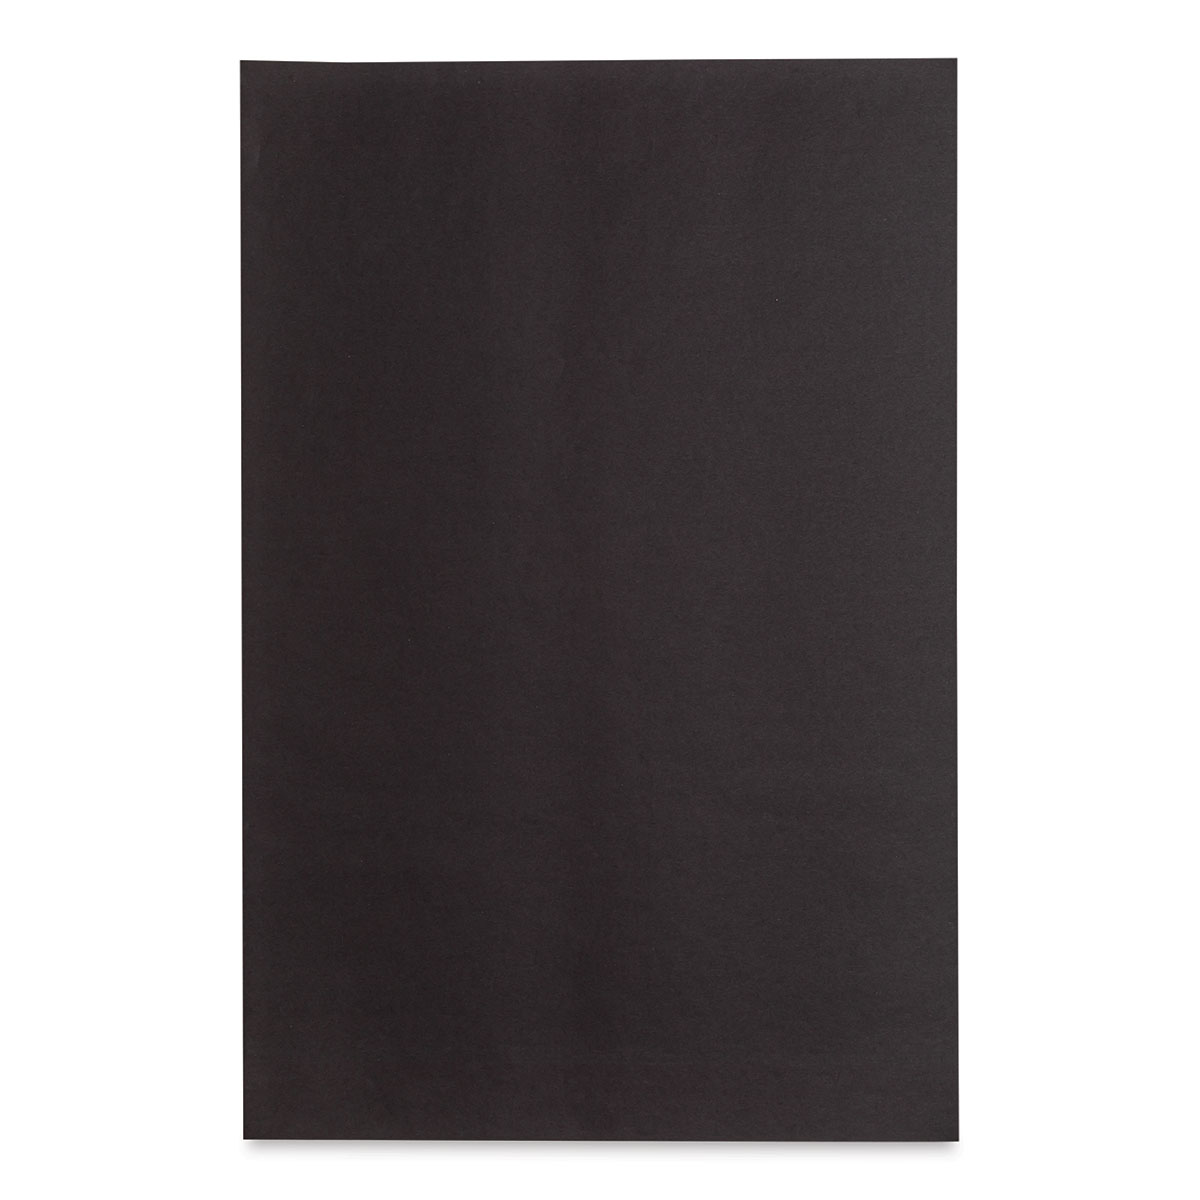  Tru-Ray Extra Large Construction Paper, 24 x 36 Inches, Black,  50 Sheets : Arts, Crafts & Sewing